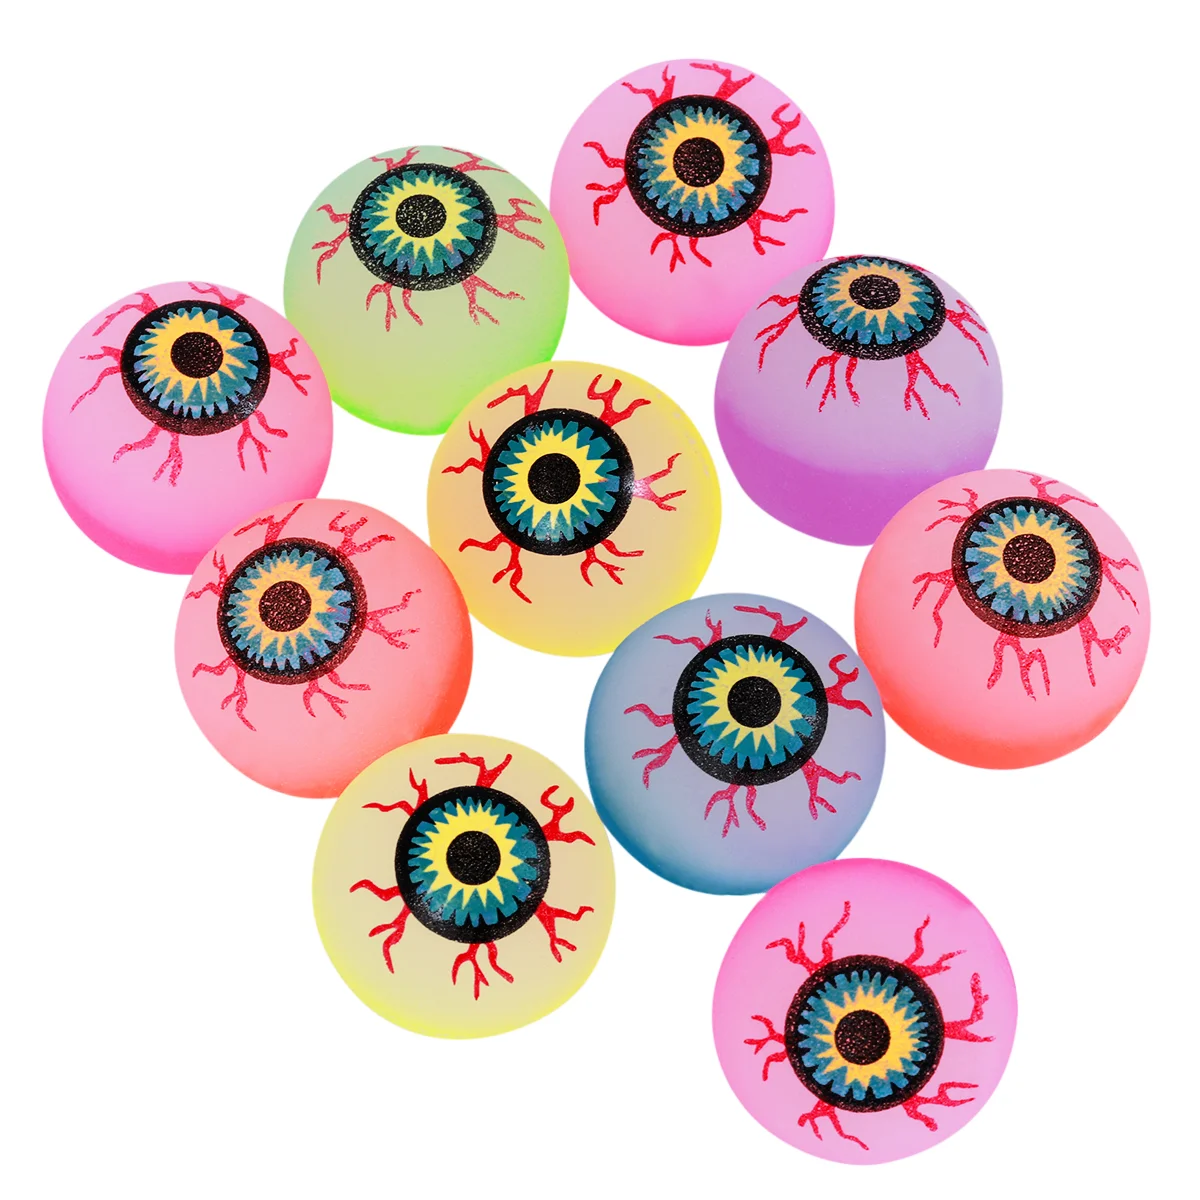 

TOYMYTOY 10pcs 32mm Glow in the Dark Halloween Bouncy Balls Scary Eye Balls Halloween Party Supplies (Random Color)